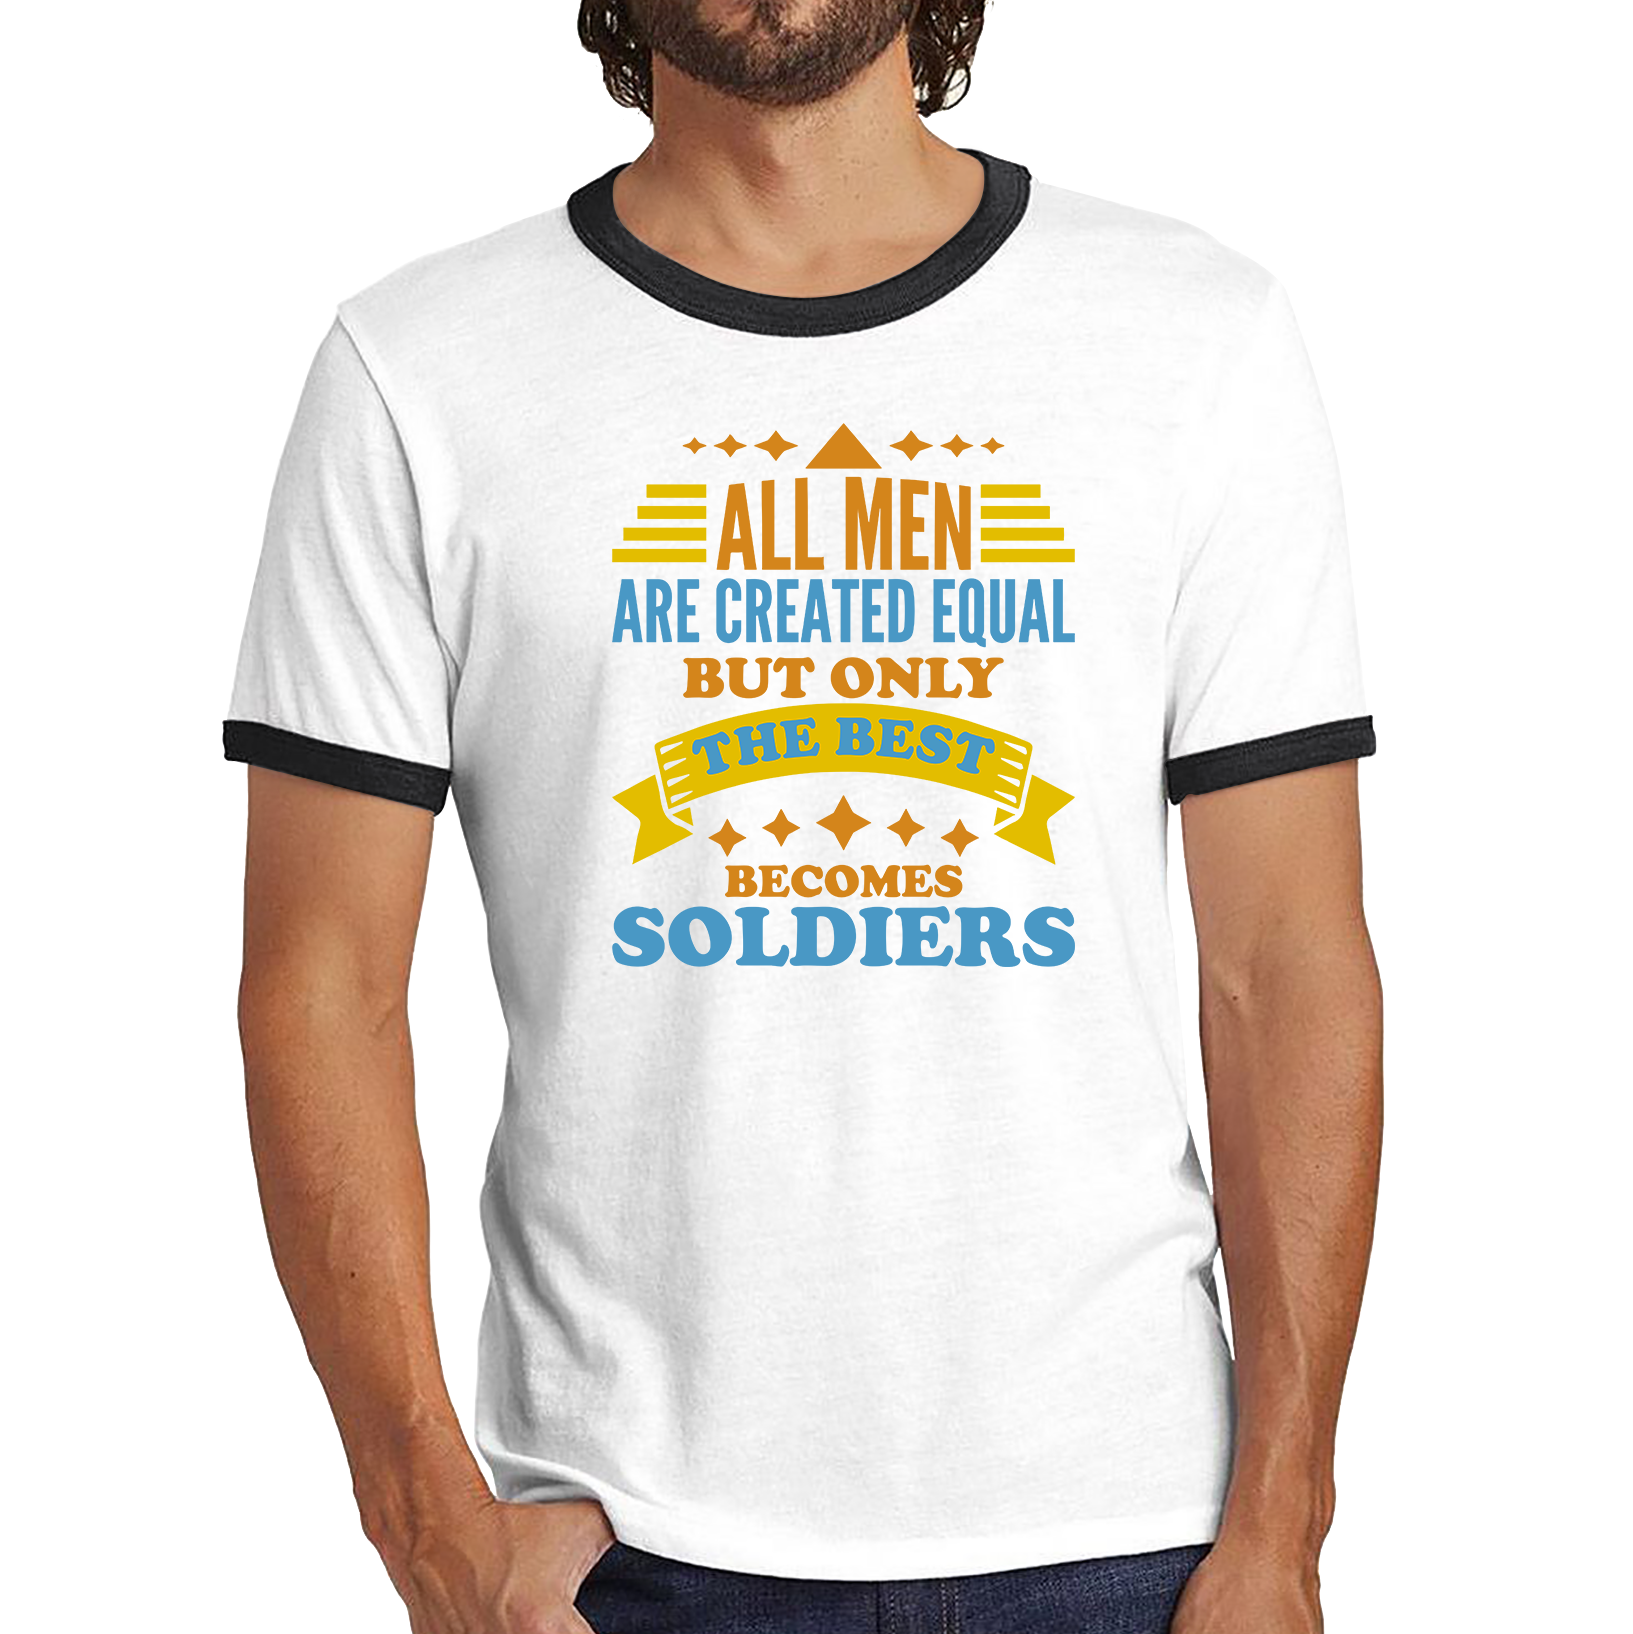 All Men Are Created Equal But Only The Best Becomes Soldiers Ringer T Shirt